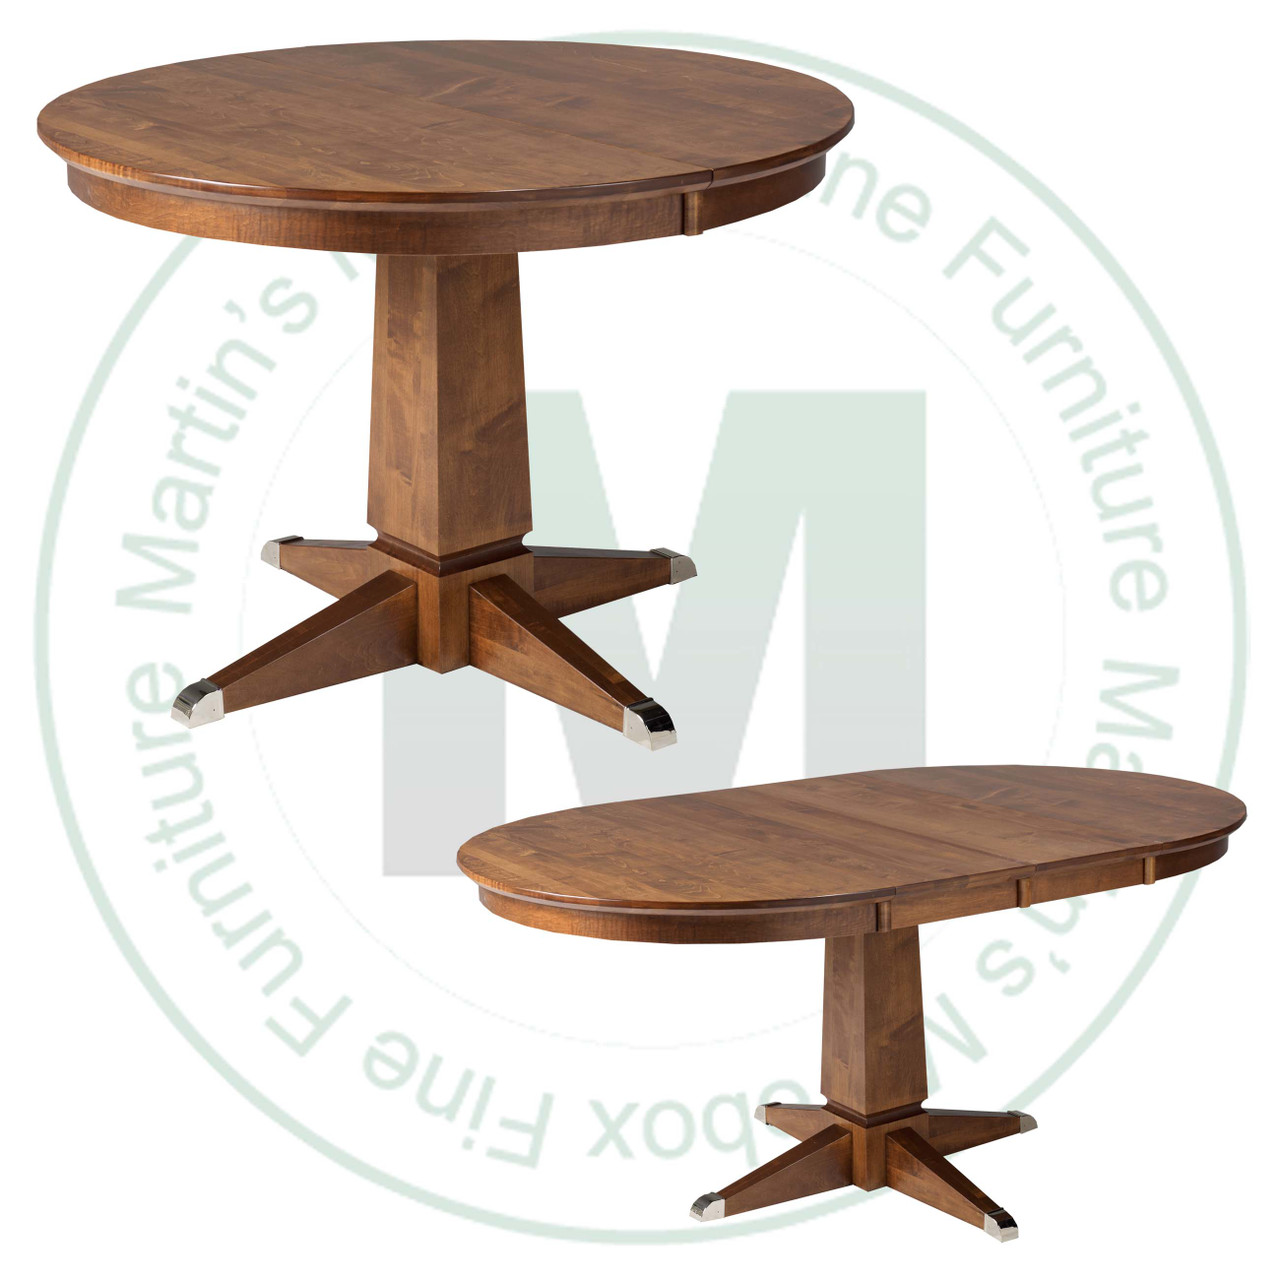 Wormy Maple Danish Single Pedestal Table 48''D x 48''W x 30''H With 2 - 12'' Leaves